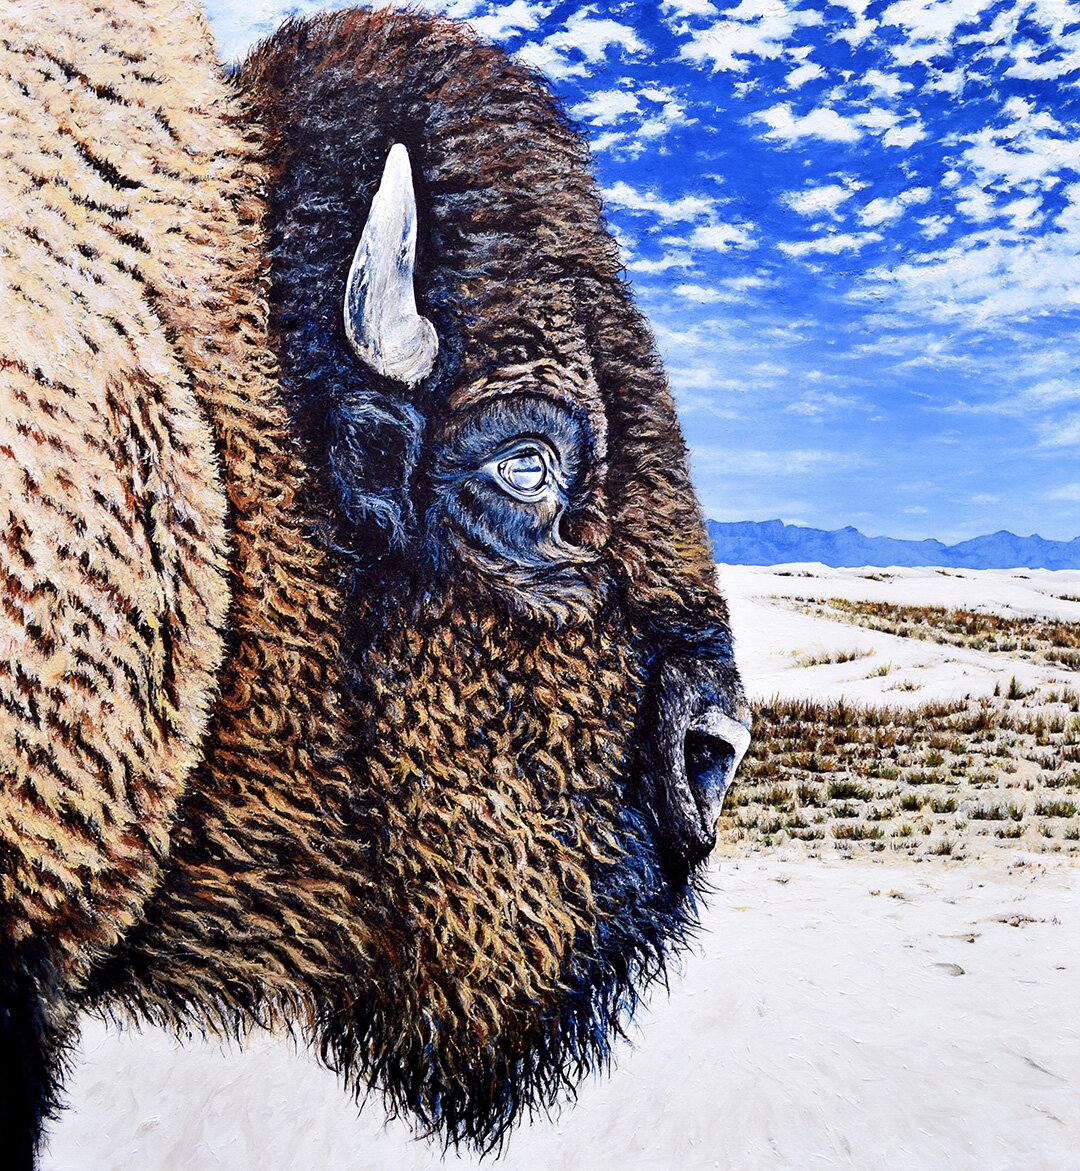 Bison Meets White Sands, NM